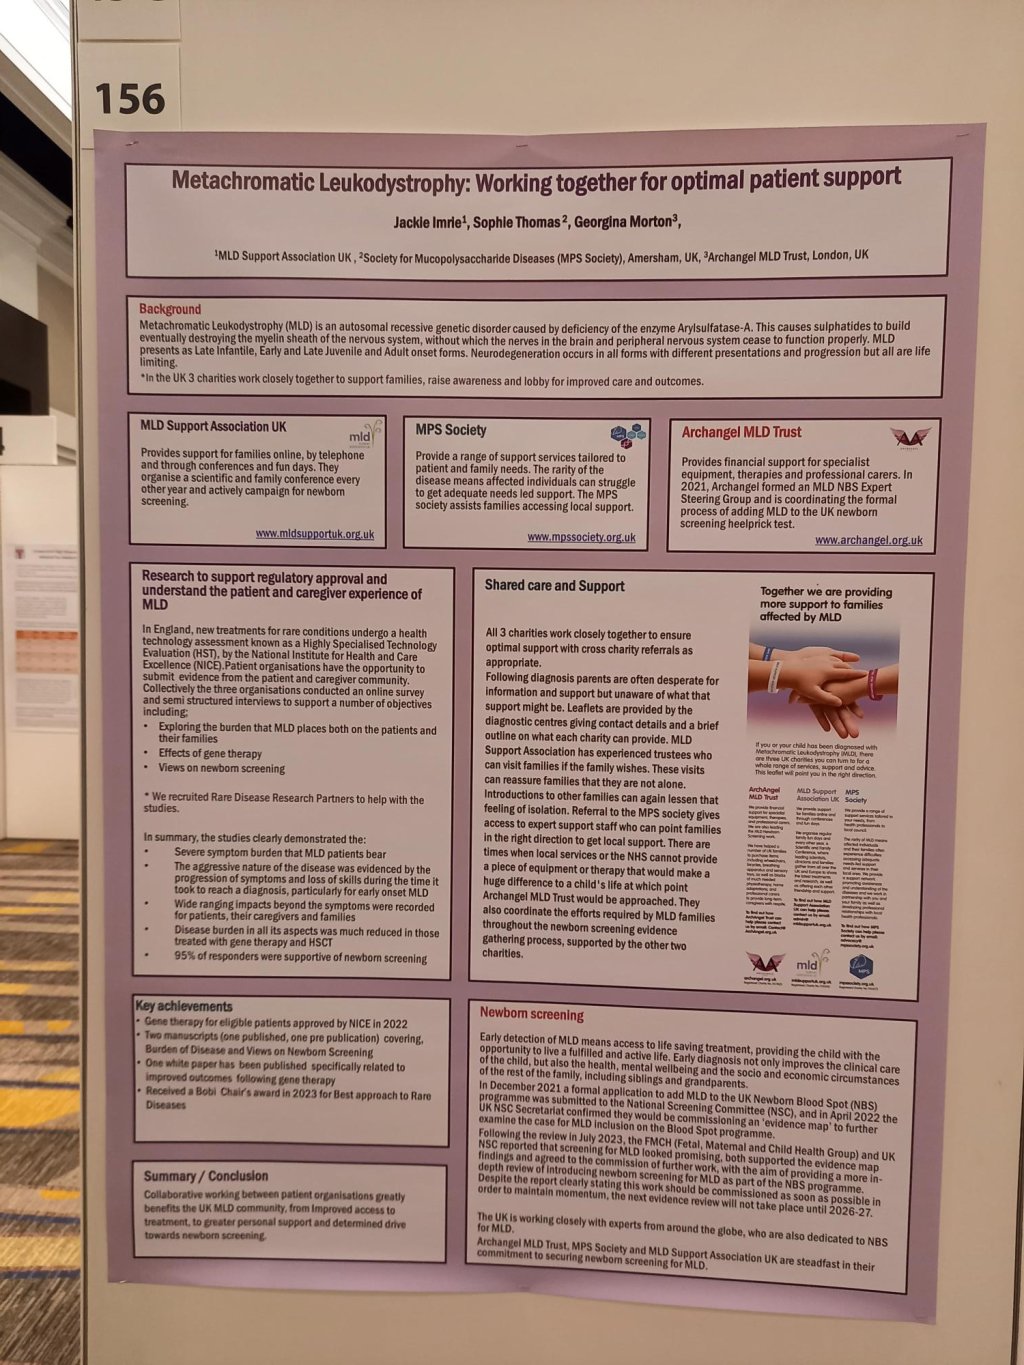 Poster about Metachromatic Leukodystrophy: working together for optimal patient support.